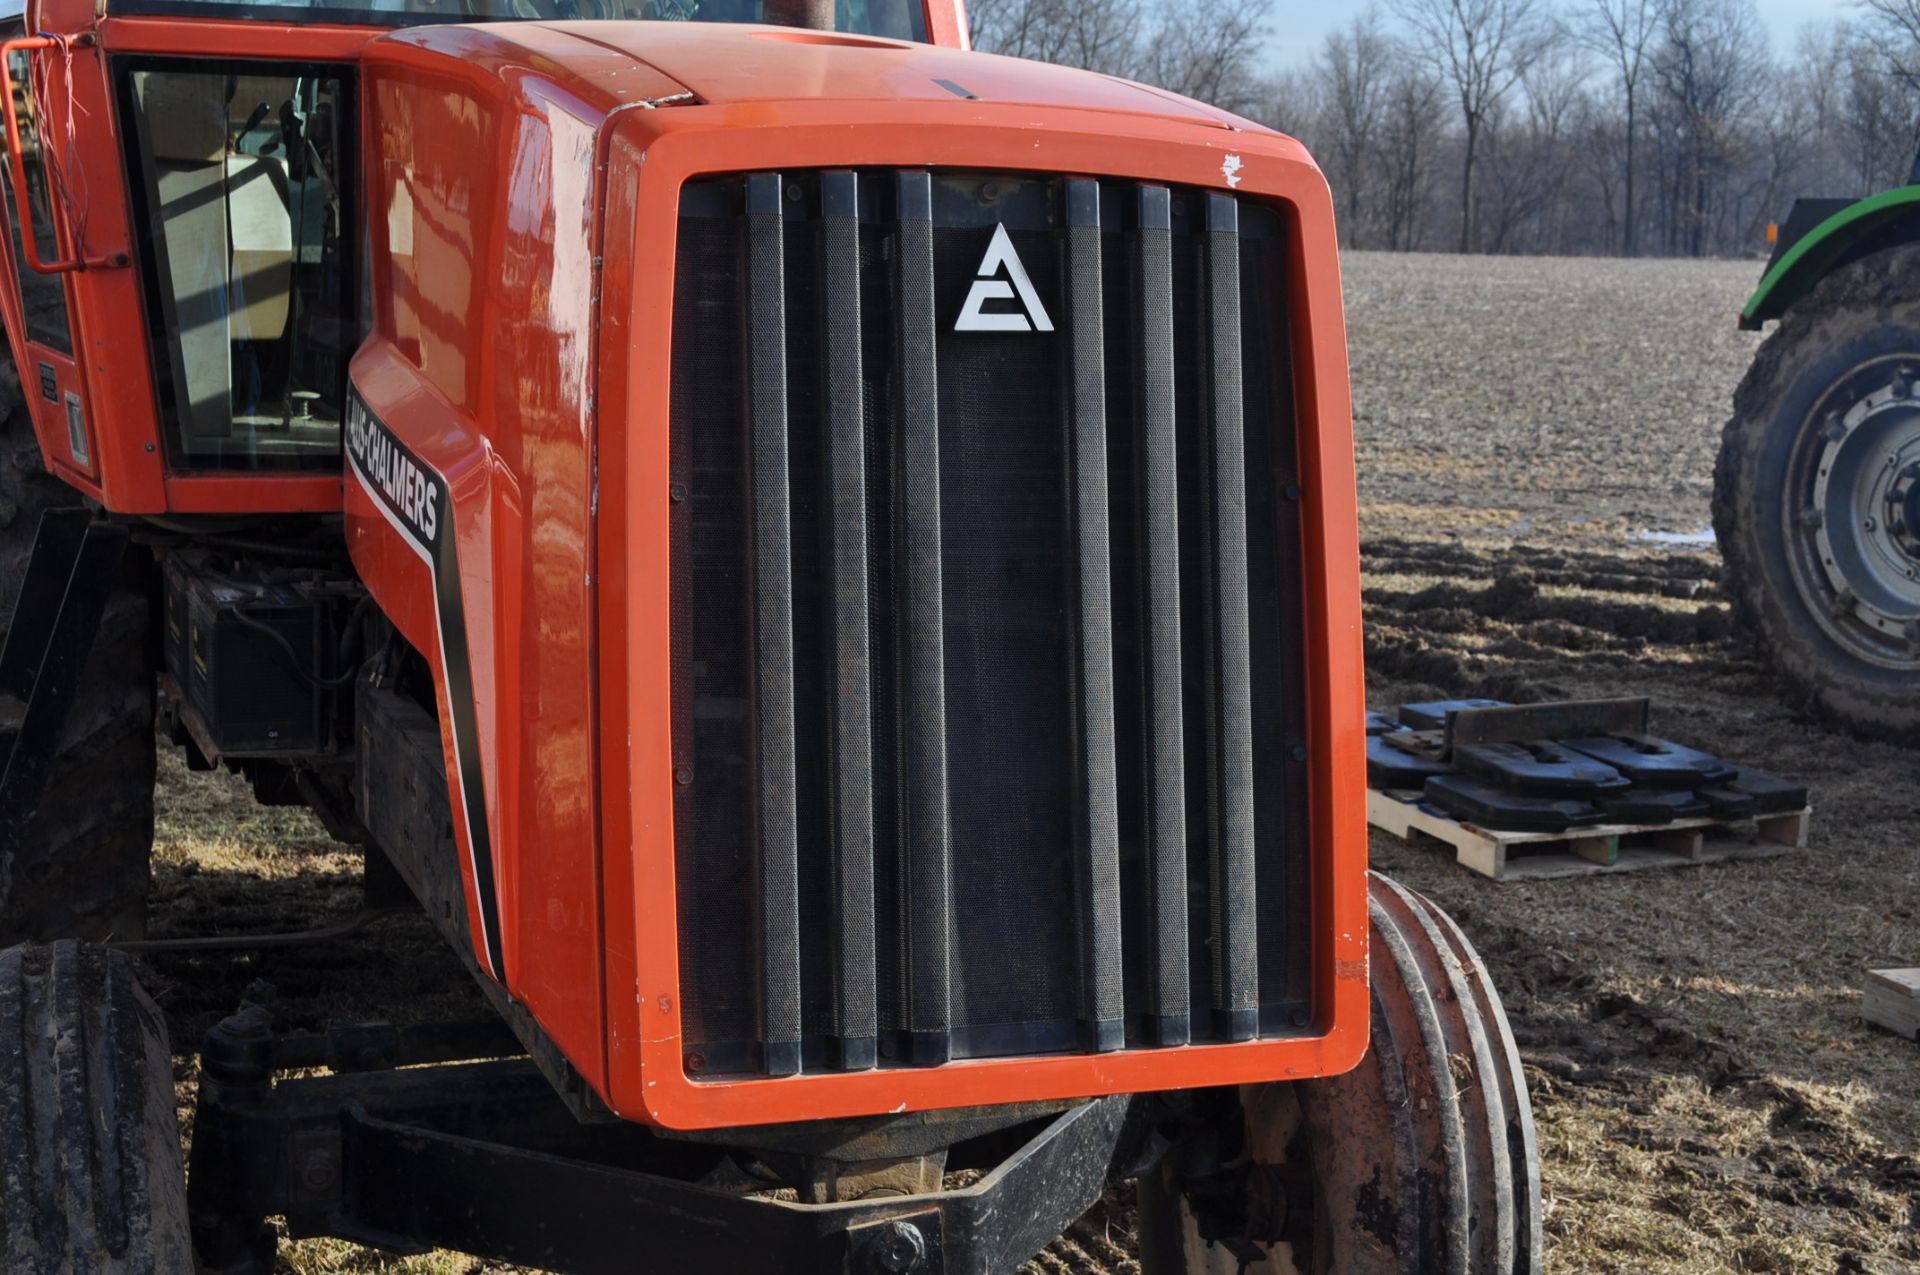 1982 Allis Chalmers 8010 tractor, power direct 20 spd, CHA, 2 remotes,540/1000 PTO, 3pt, 18.4 x 38 - Image 27 of 28